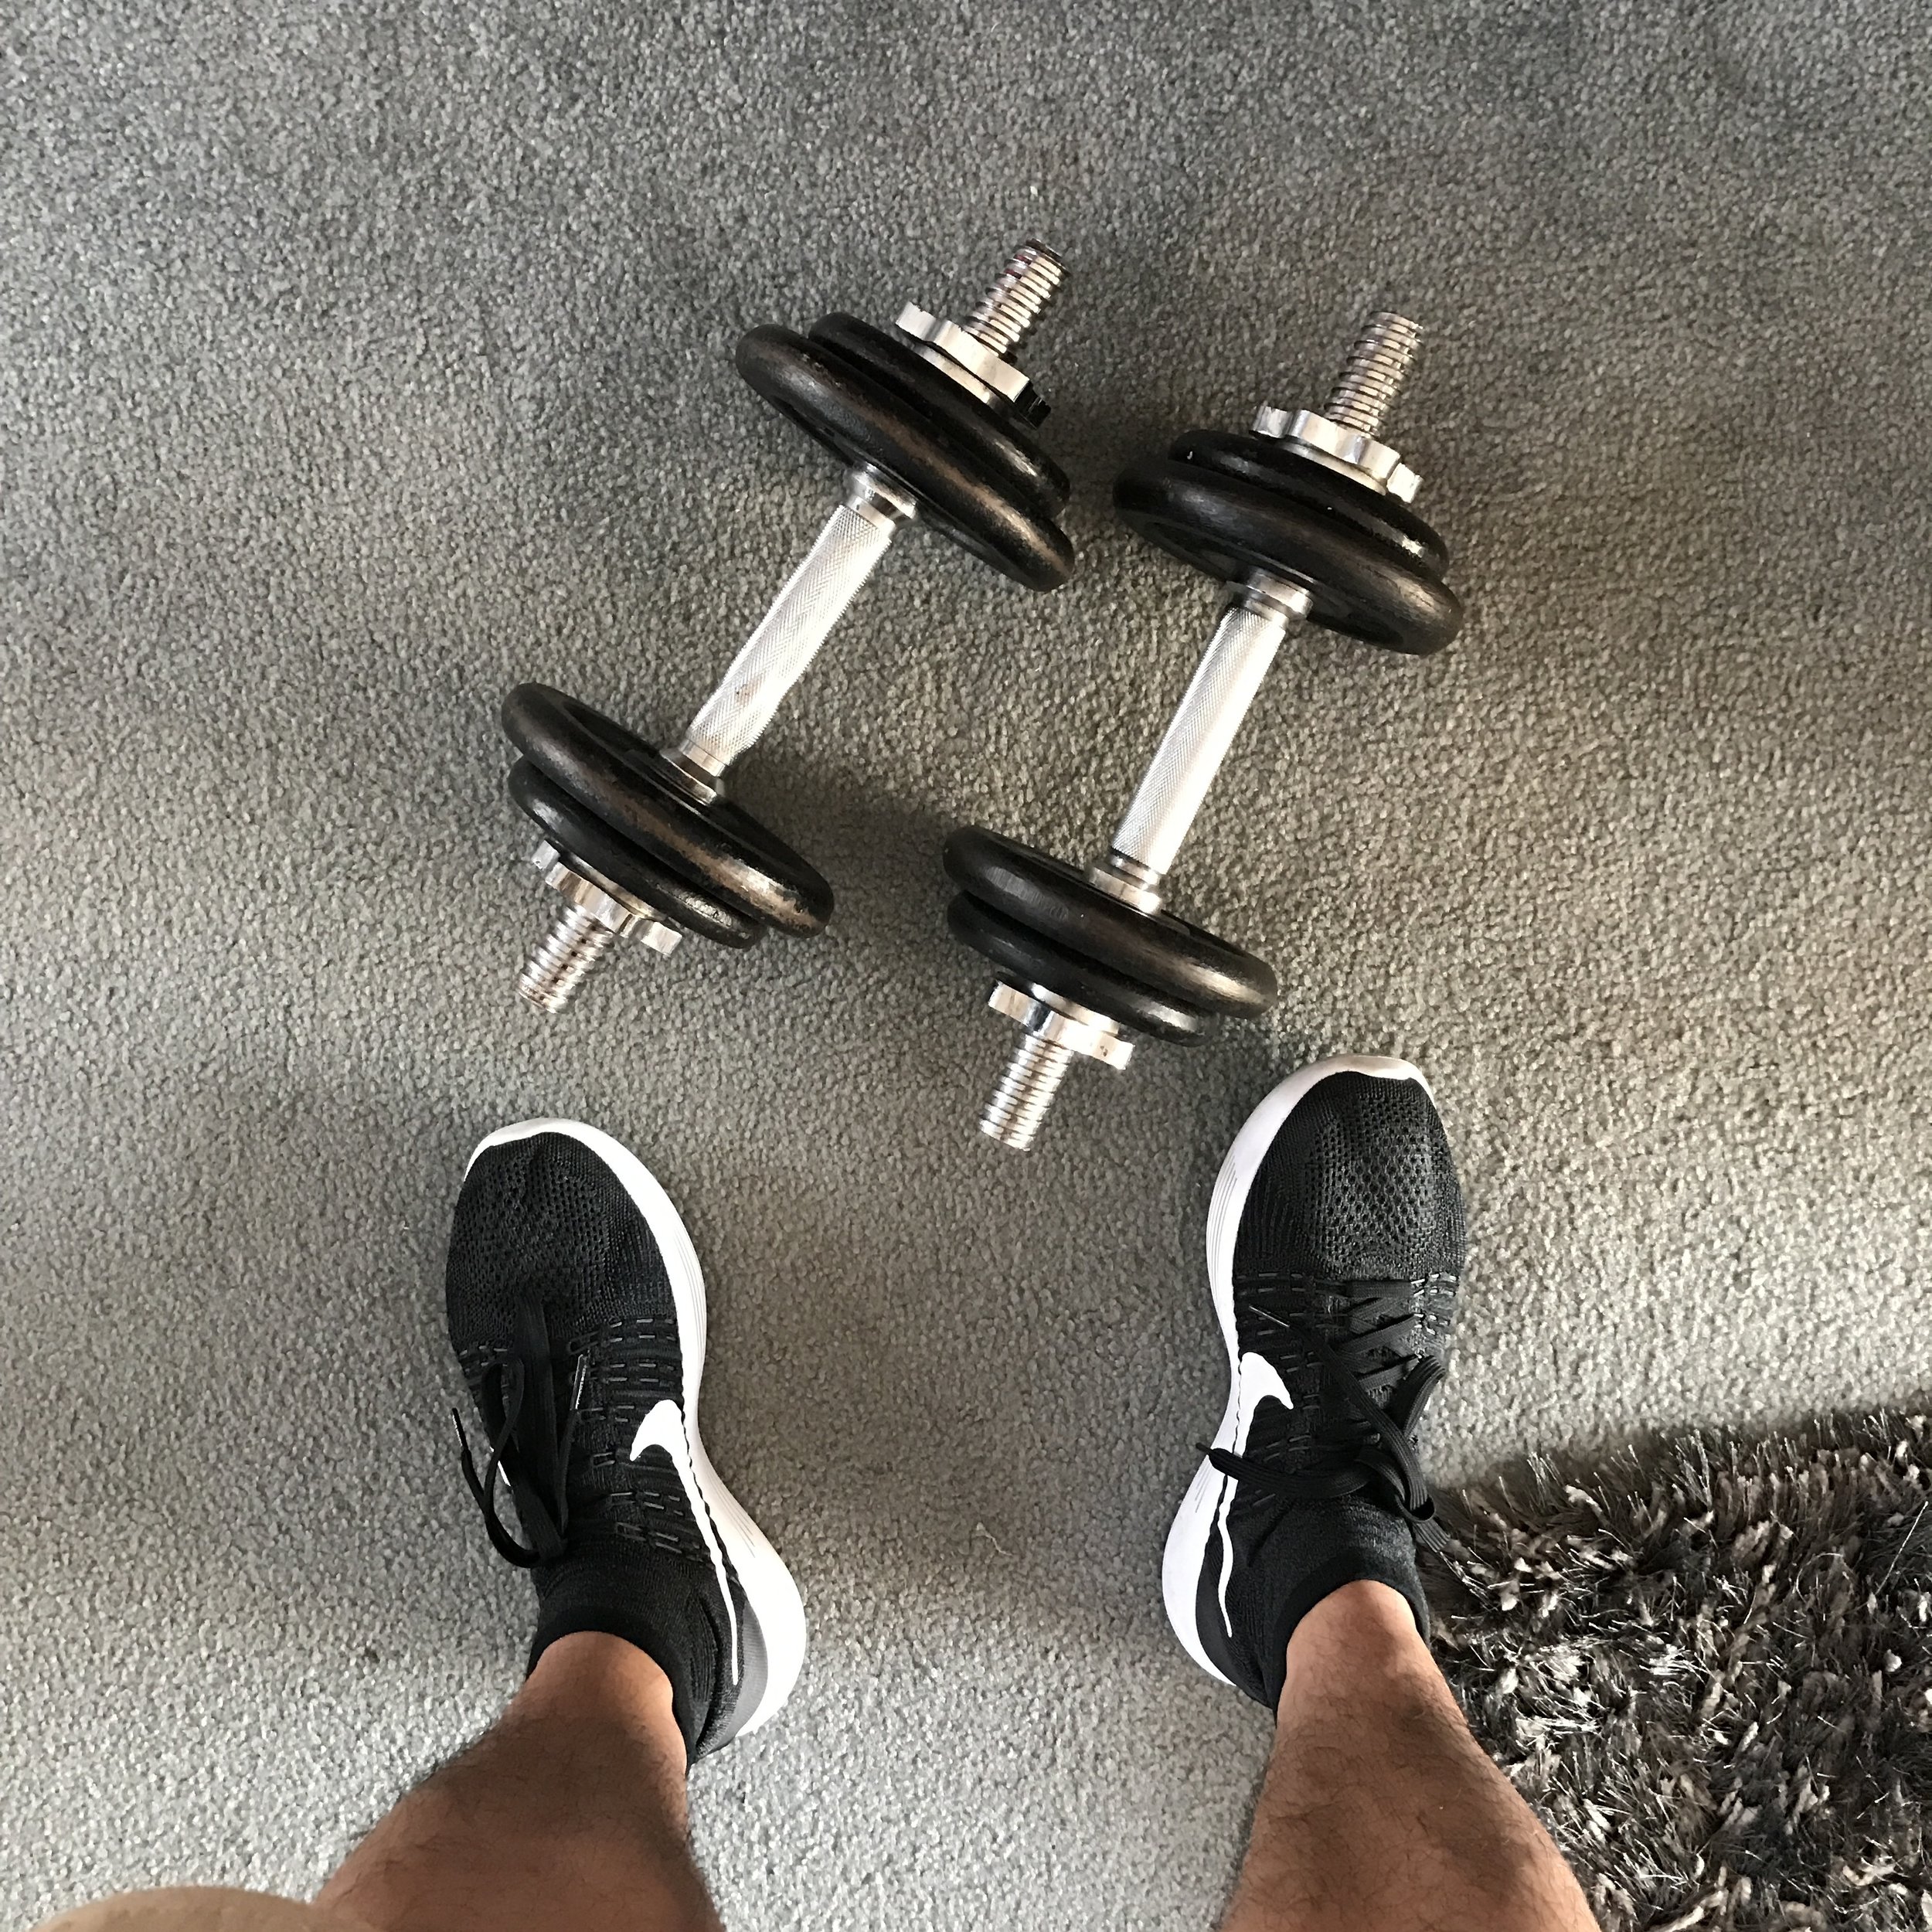   Dumbbells  There are days when you can't just be bothered going to the gym. But this doesn't mean binge-watching in bed and munching on chips. A good set of dumbbells (with a total of 40 pounds of weight) and a short but effective circuit-training 